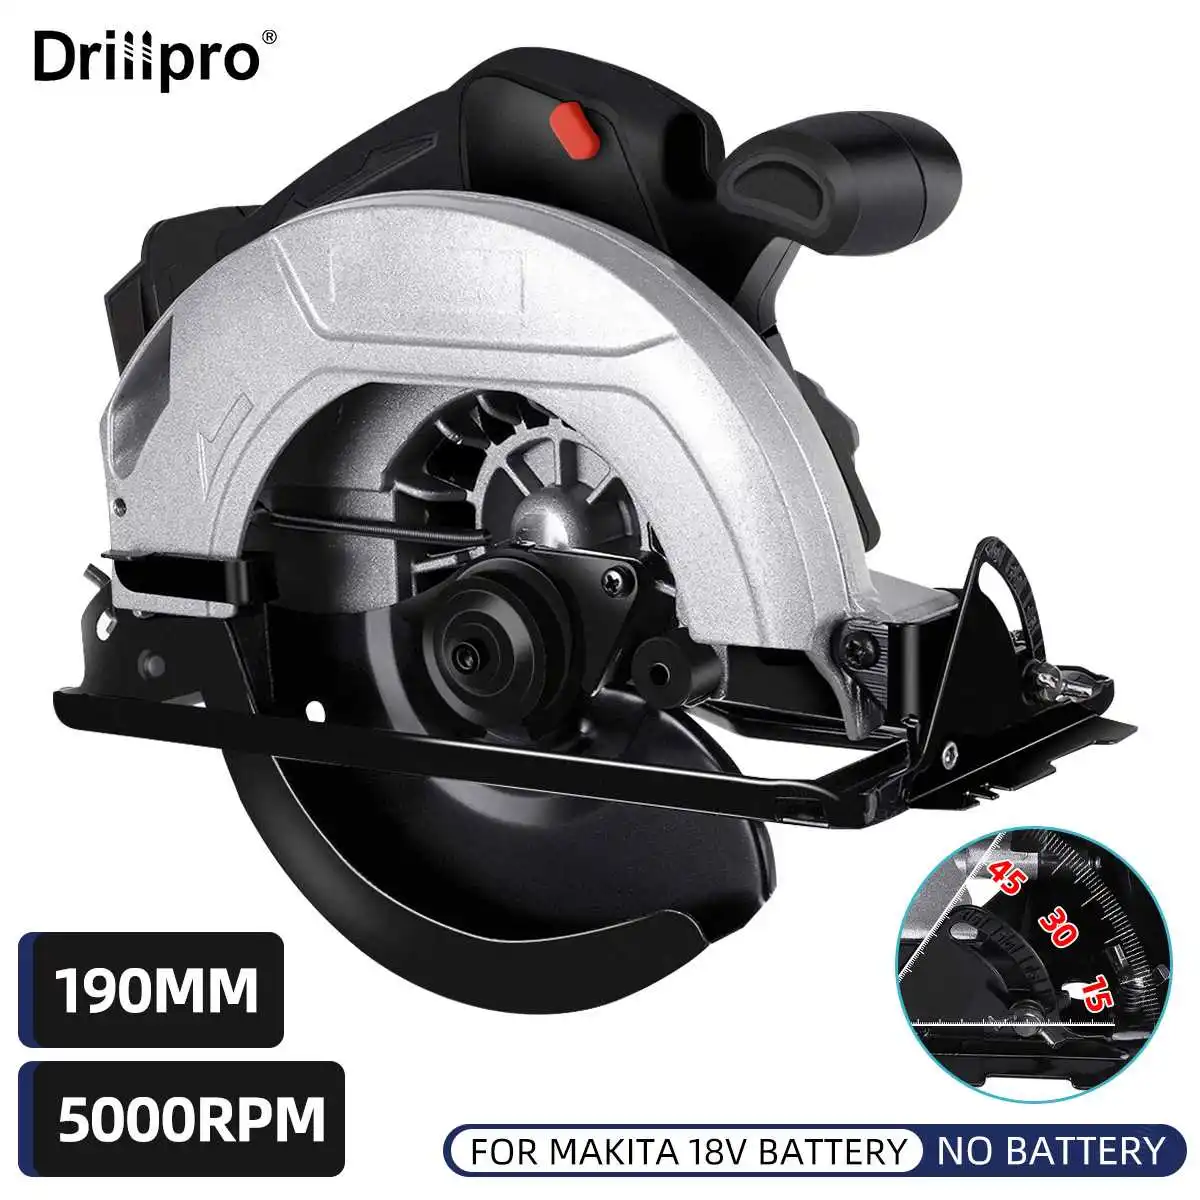 

Drillpro 18V Cordless Electric Circular Saw 5000RPM 190mm Dust Passage Woodworking Cutting Machine Tool for Makita 18V Battery